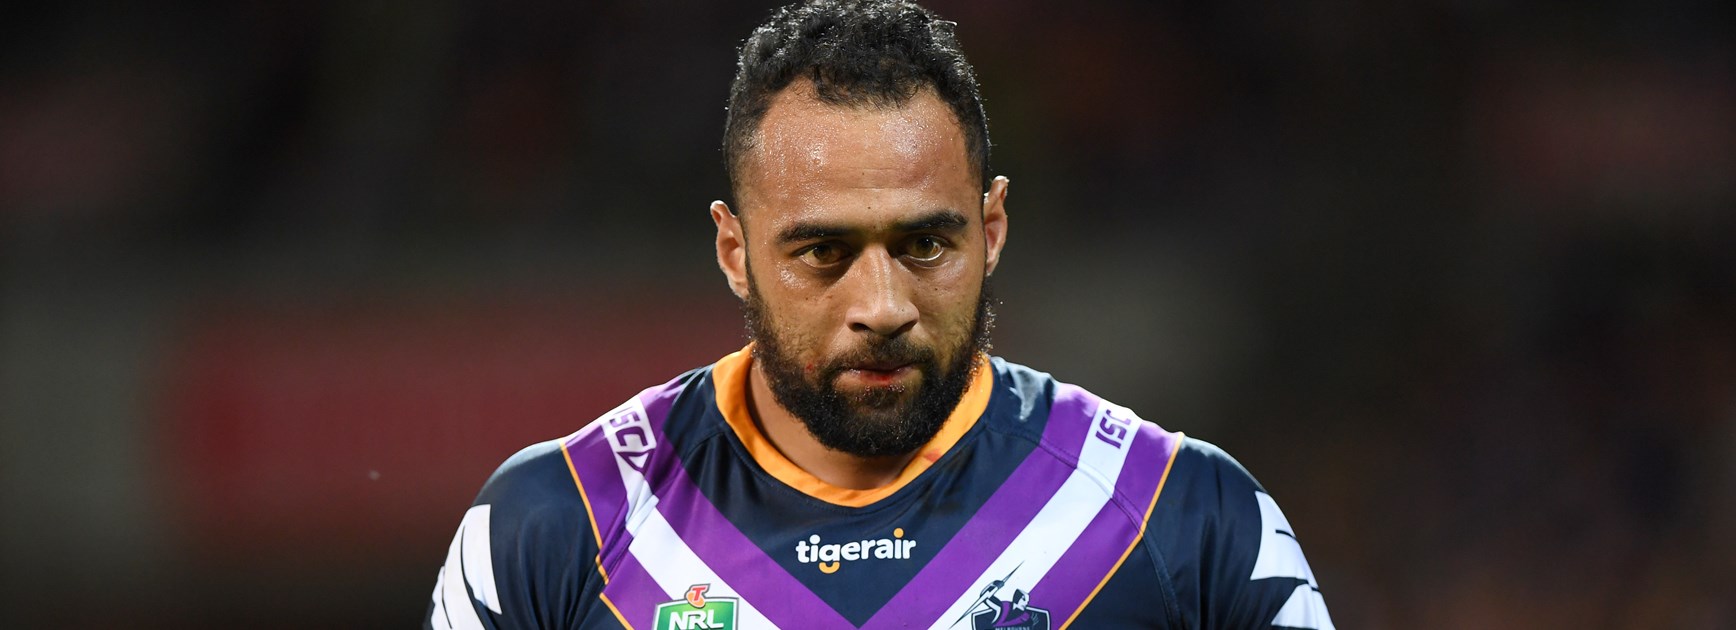 Kasiano sidelined with knee injury